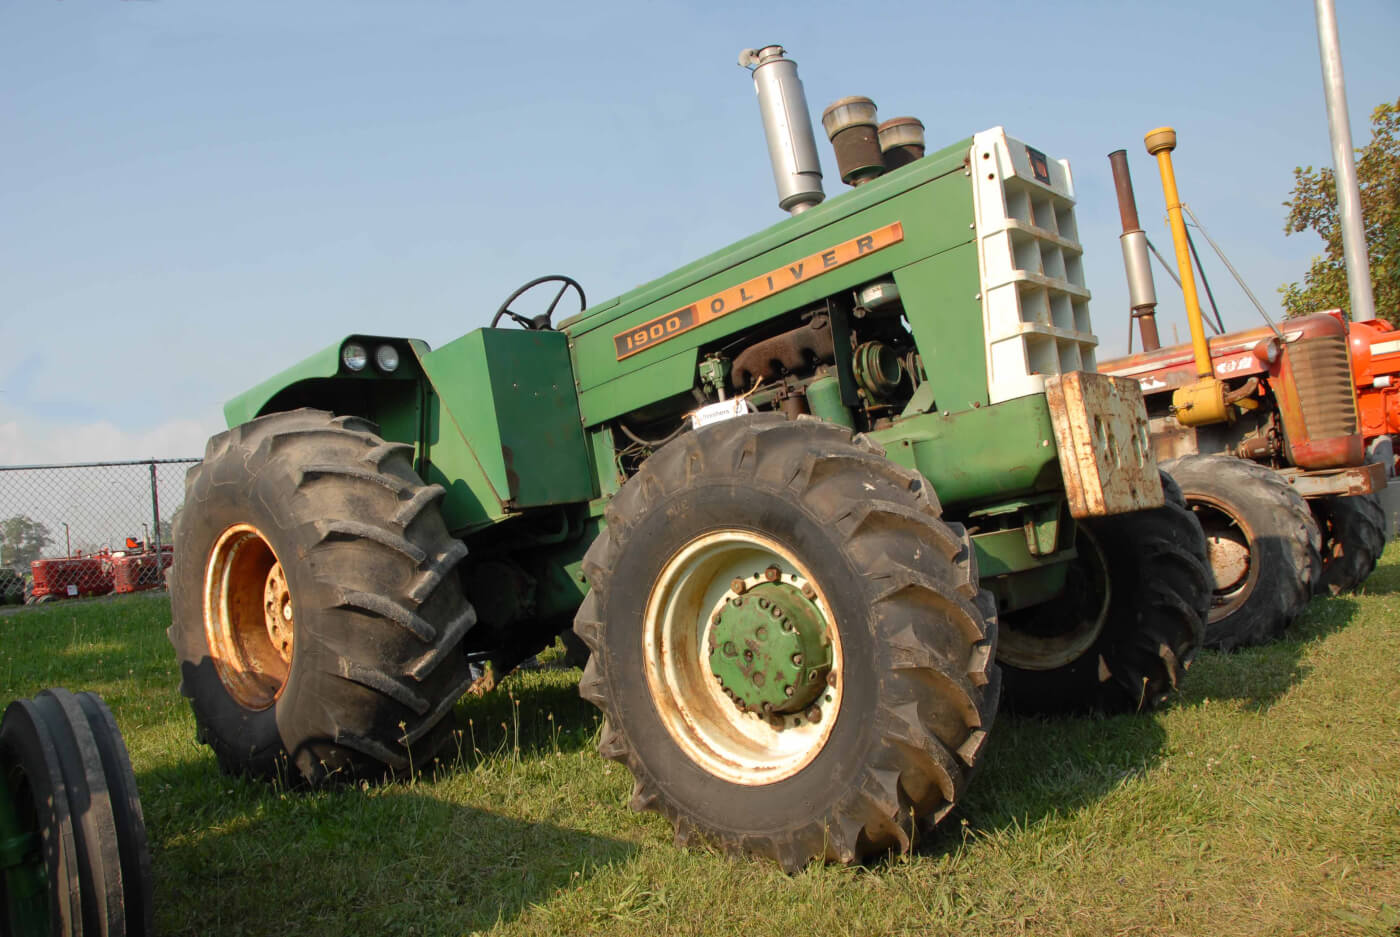 Without ballast, this big Ollie weighs 13,000 lbs. With a full load of iron, it can be up to 21,000. The 1900 B was a powerful tractor for the day, with almost 100 drawbar horsepower and the weight and traction to put it to use. This ’63 Oliver 1900 Series B four-wheel drive belongs to Tom Stacey of Wichita Falls, Texas, and was seen at the 2014 National Threshers Association event in Wauseon, Ohio.